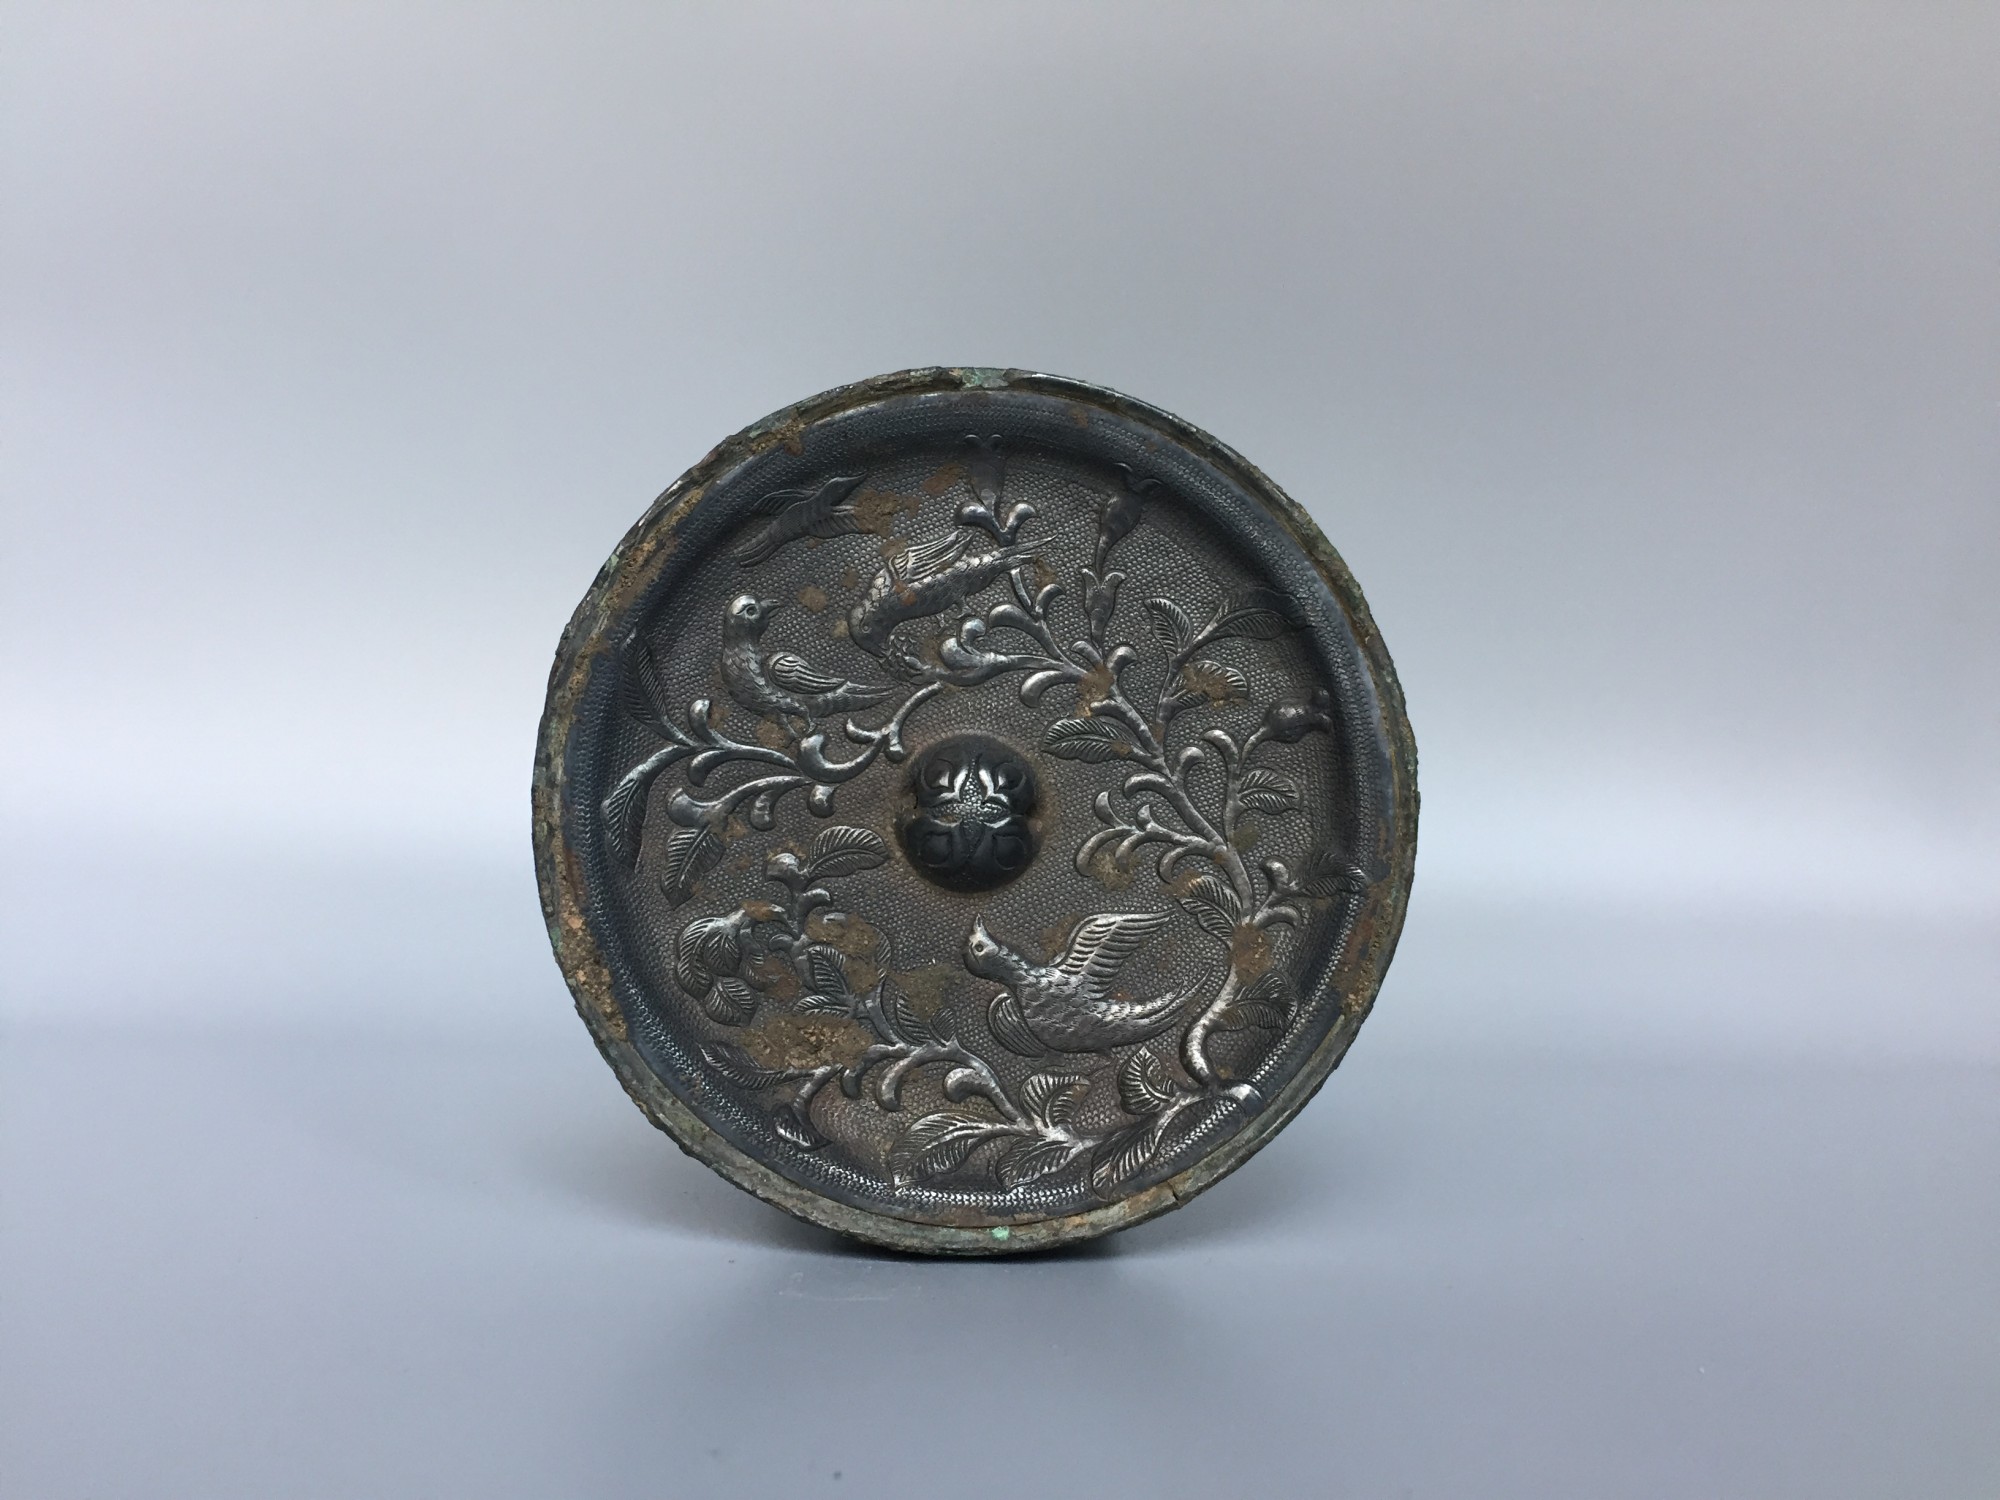 Flower and bird pattern mirror with silver button in Tang Dynasty